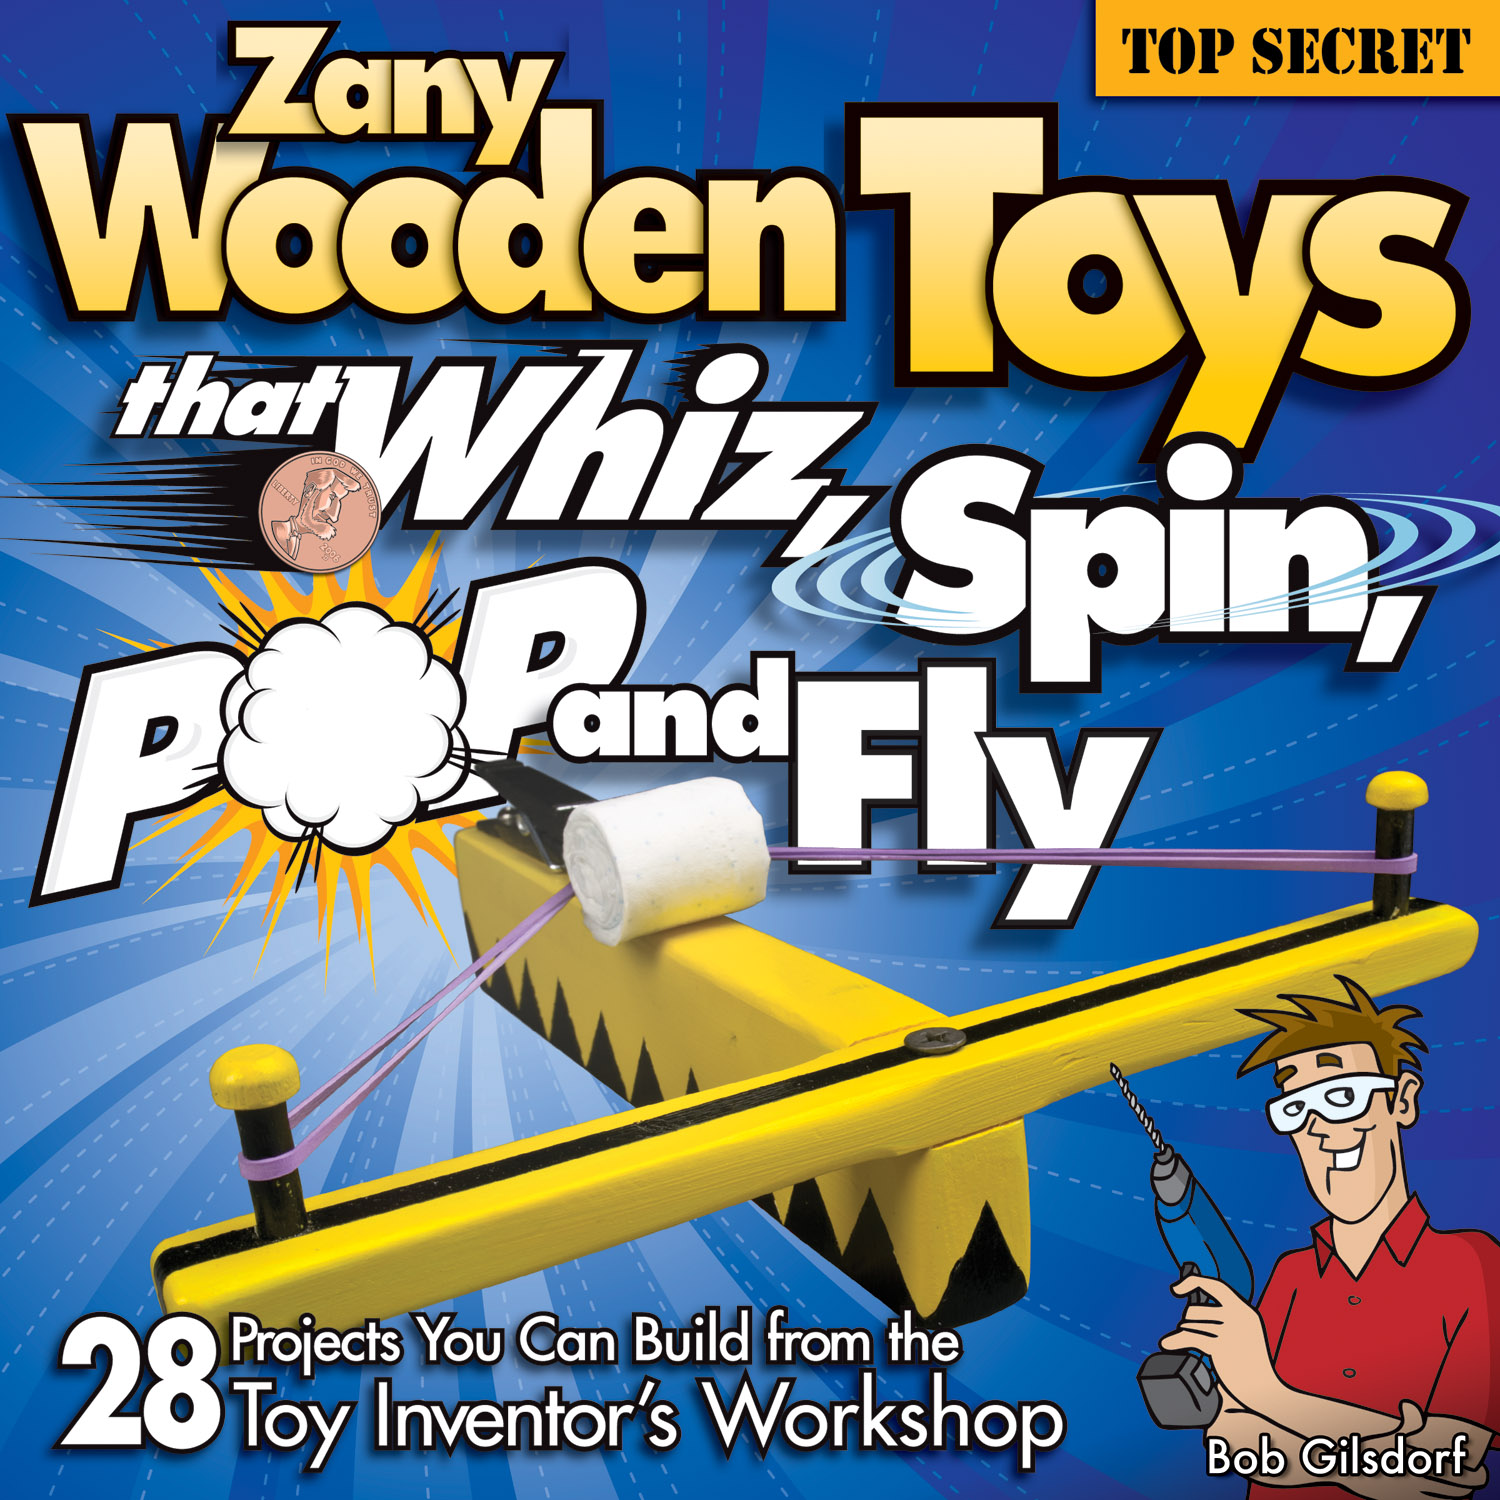 Zany Wooden Toys that Whiz, Spin, Pop, and Fly - 15-24.99